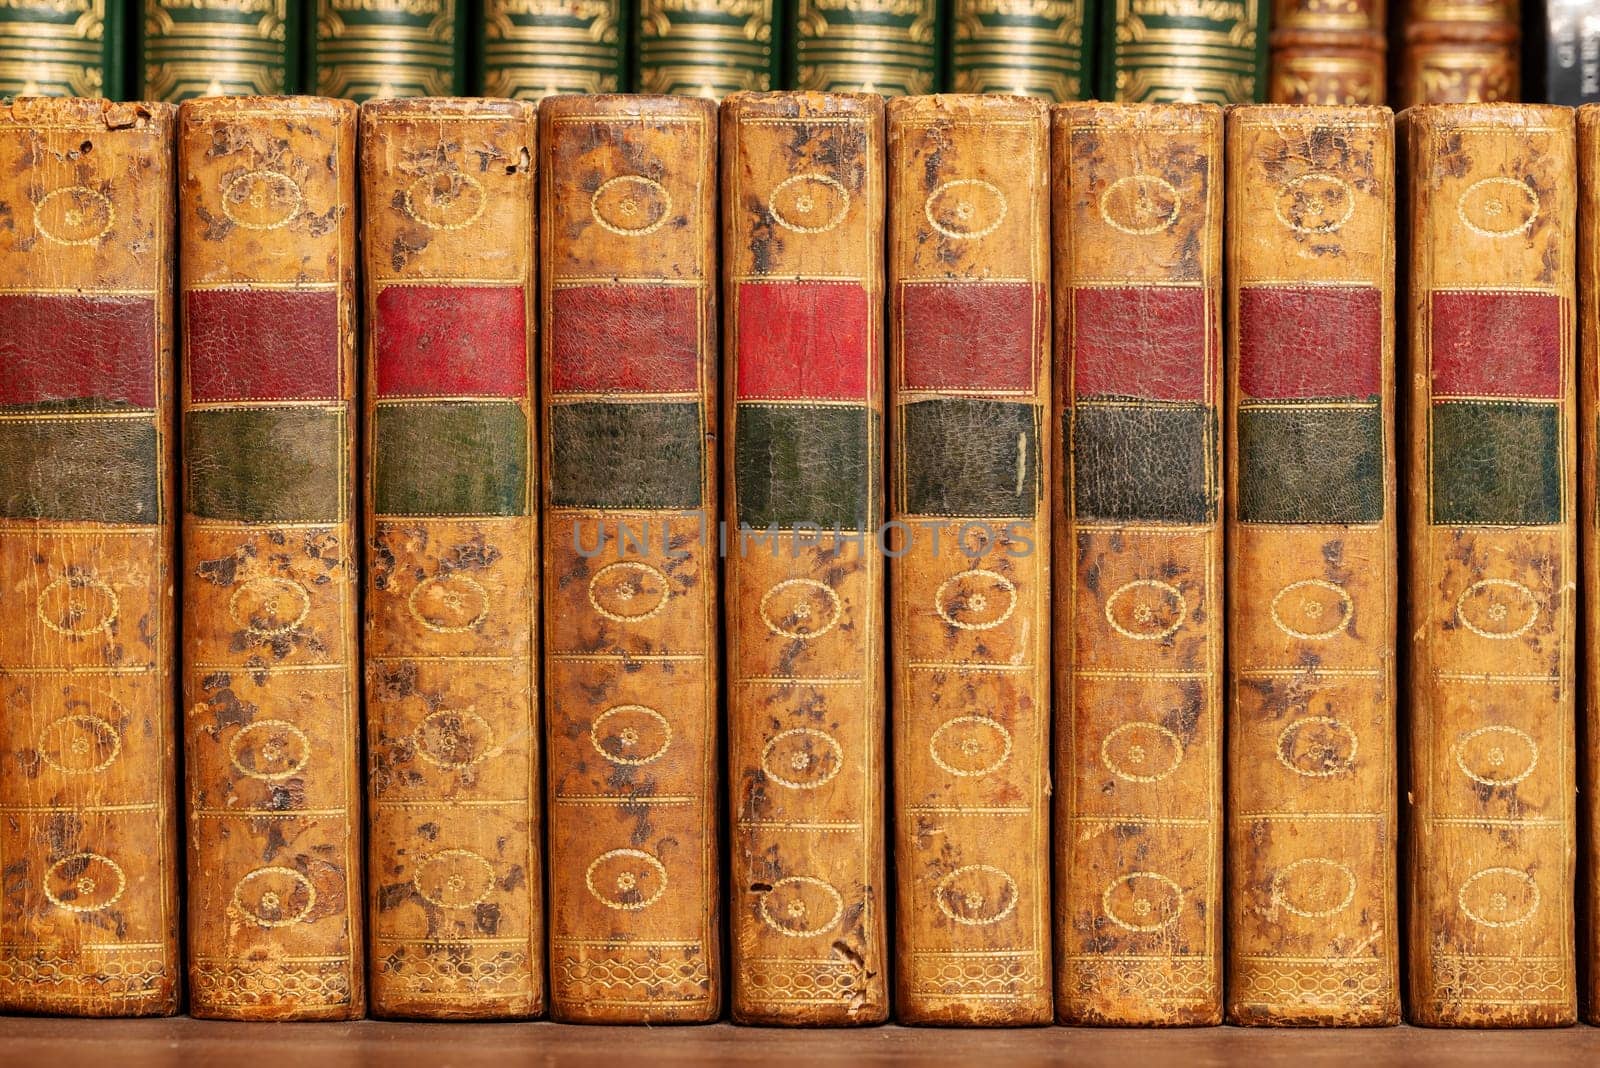 Pile of antique books with a leather cover and golden ornaments on a wooden table